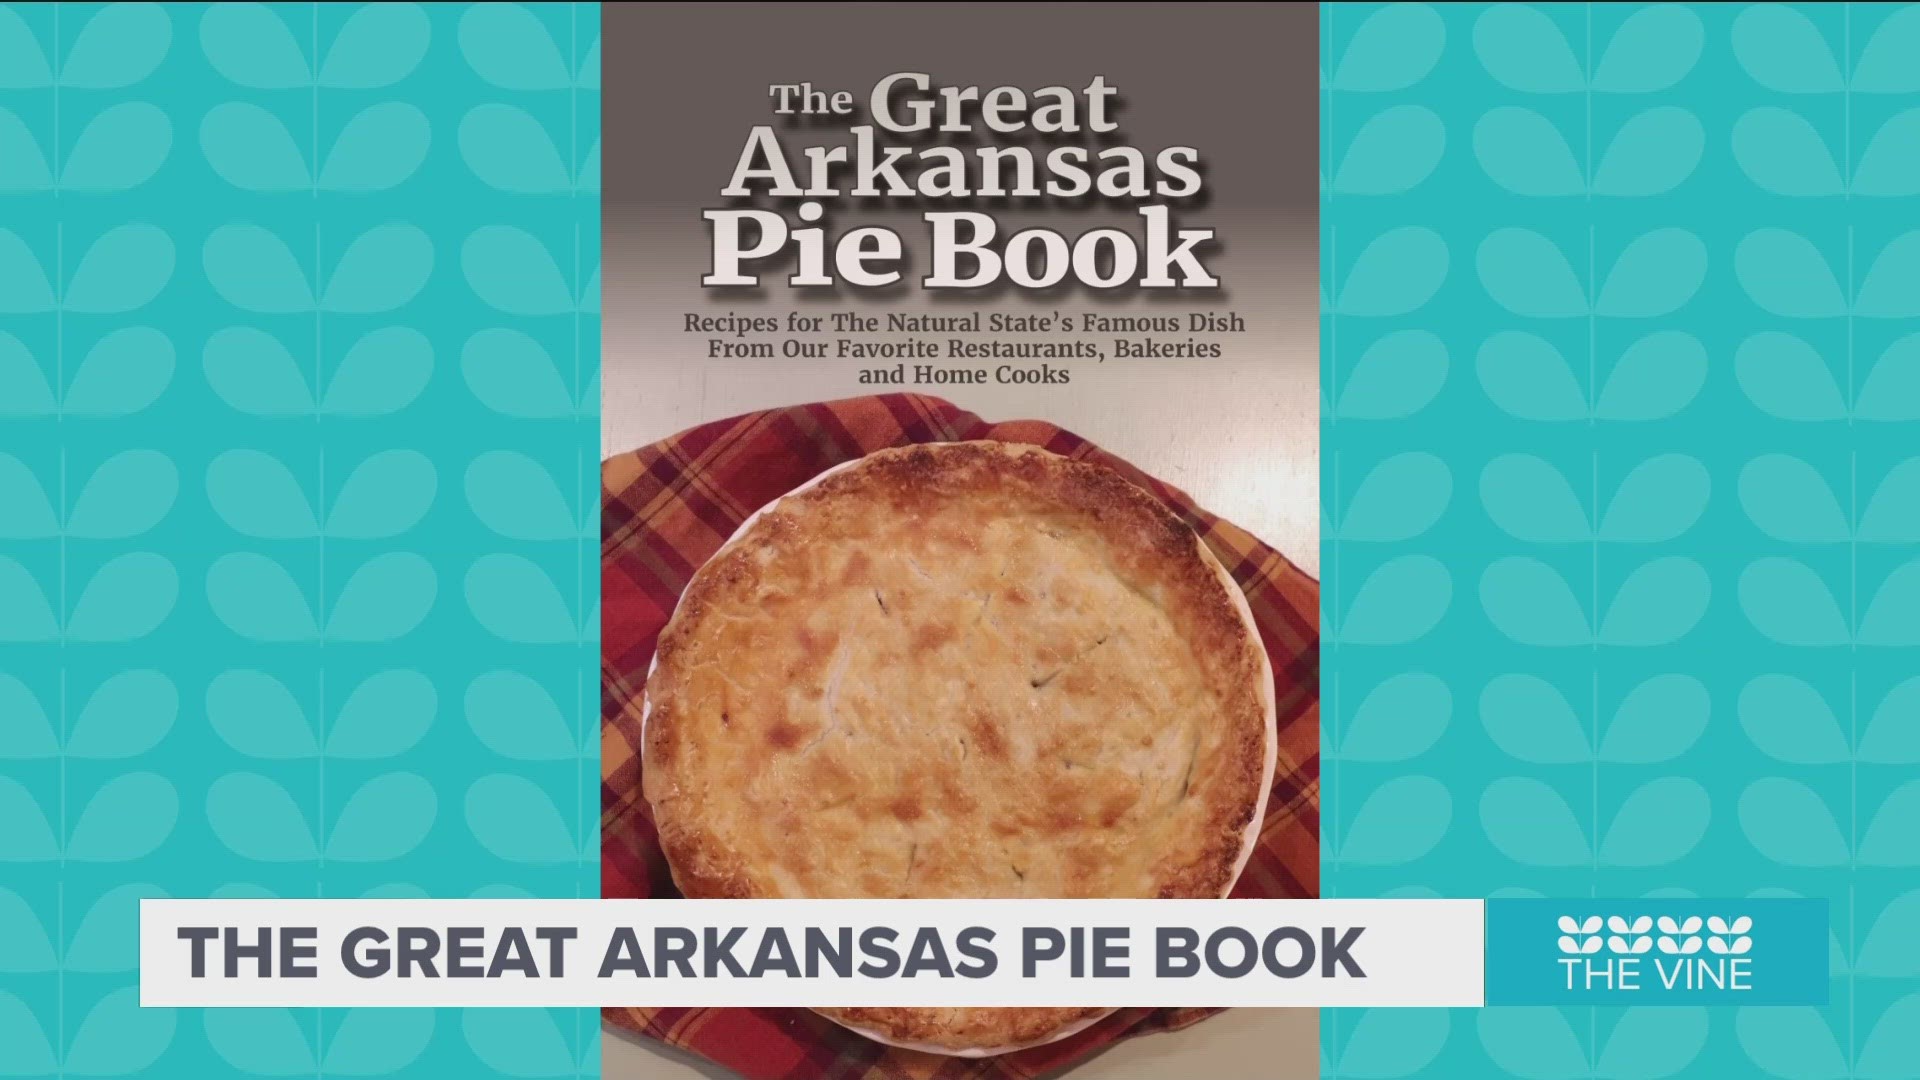 Kat Robinson, author of “The Great Arkansas Pie Book,” stopped by The Vine News to talk about her book and all things pie.